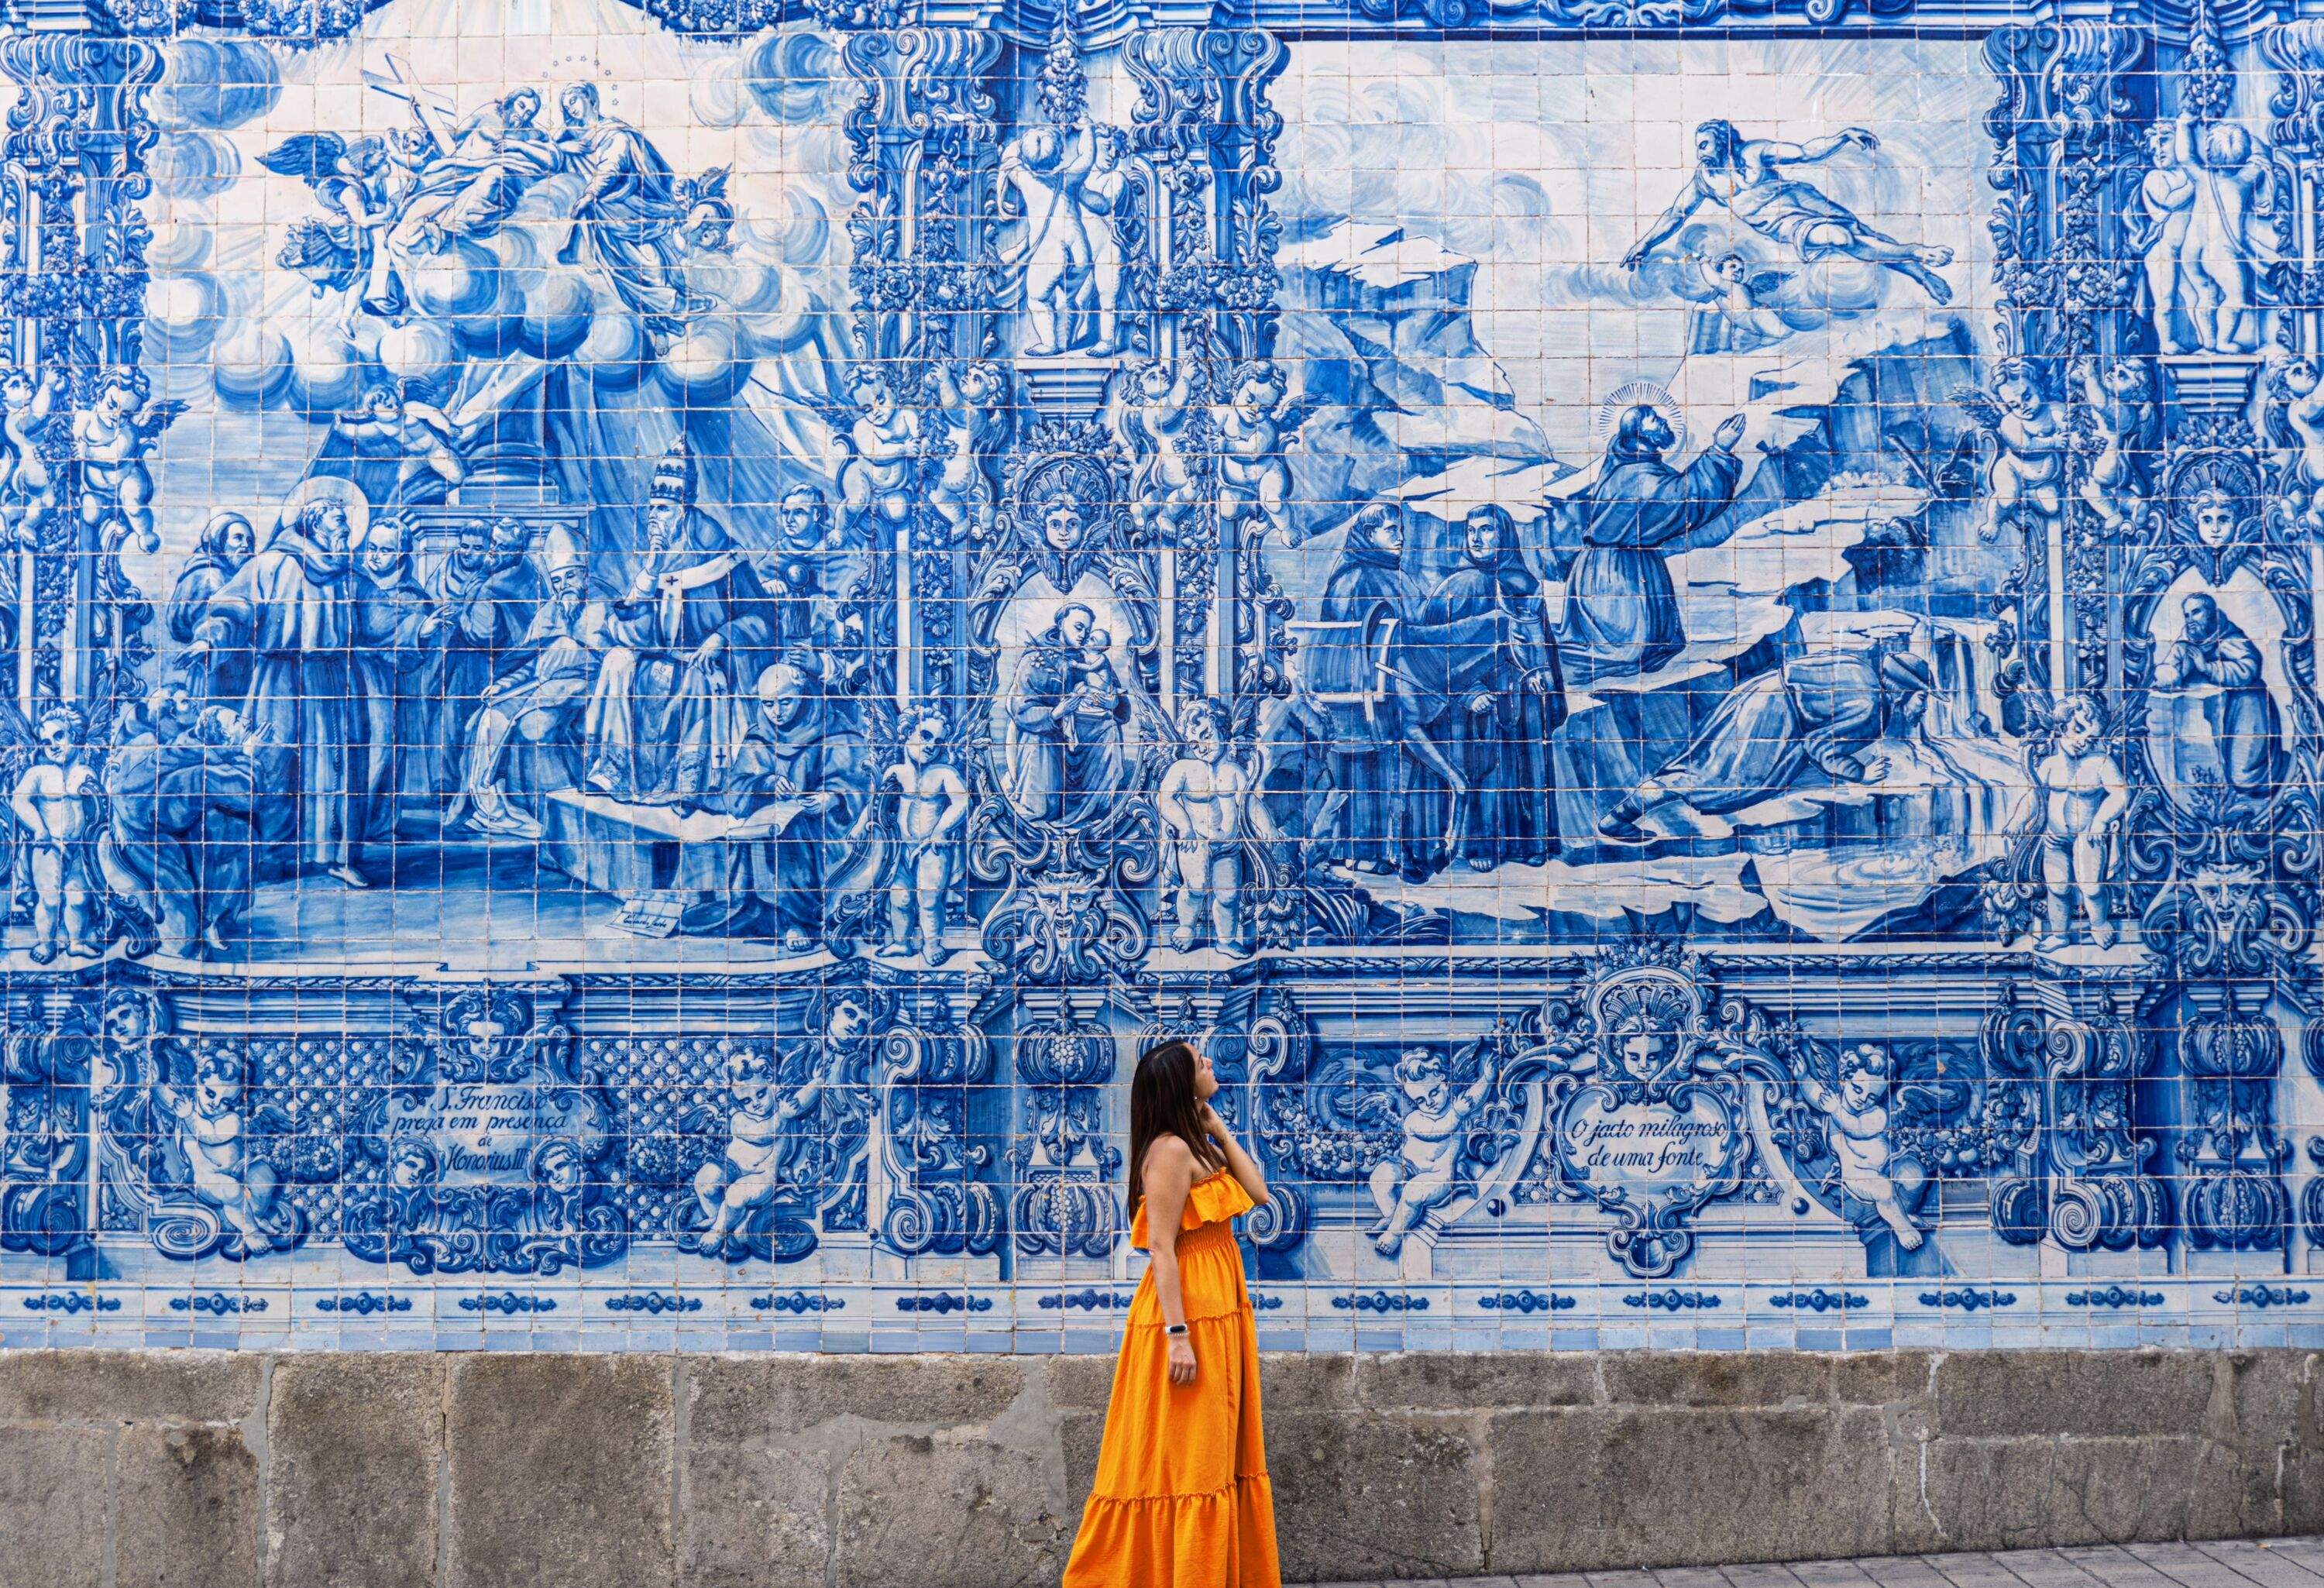 Woman in an orange dress gazing at old decorative traditional azulejo tiles in a city